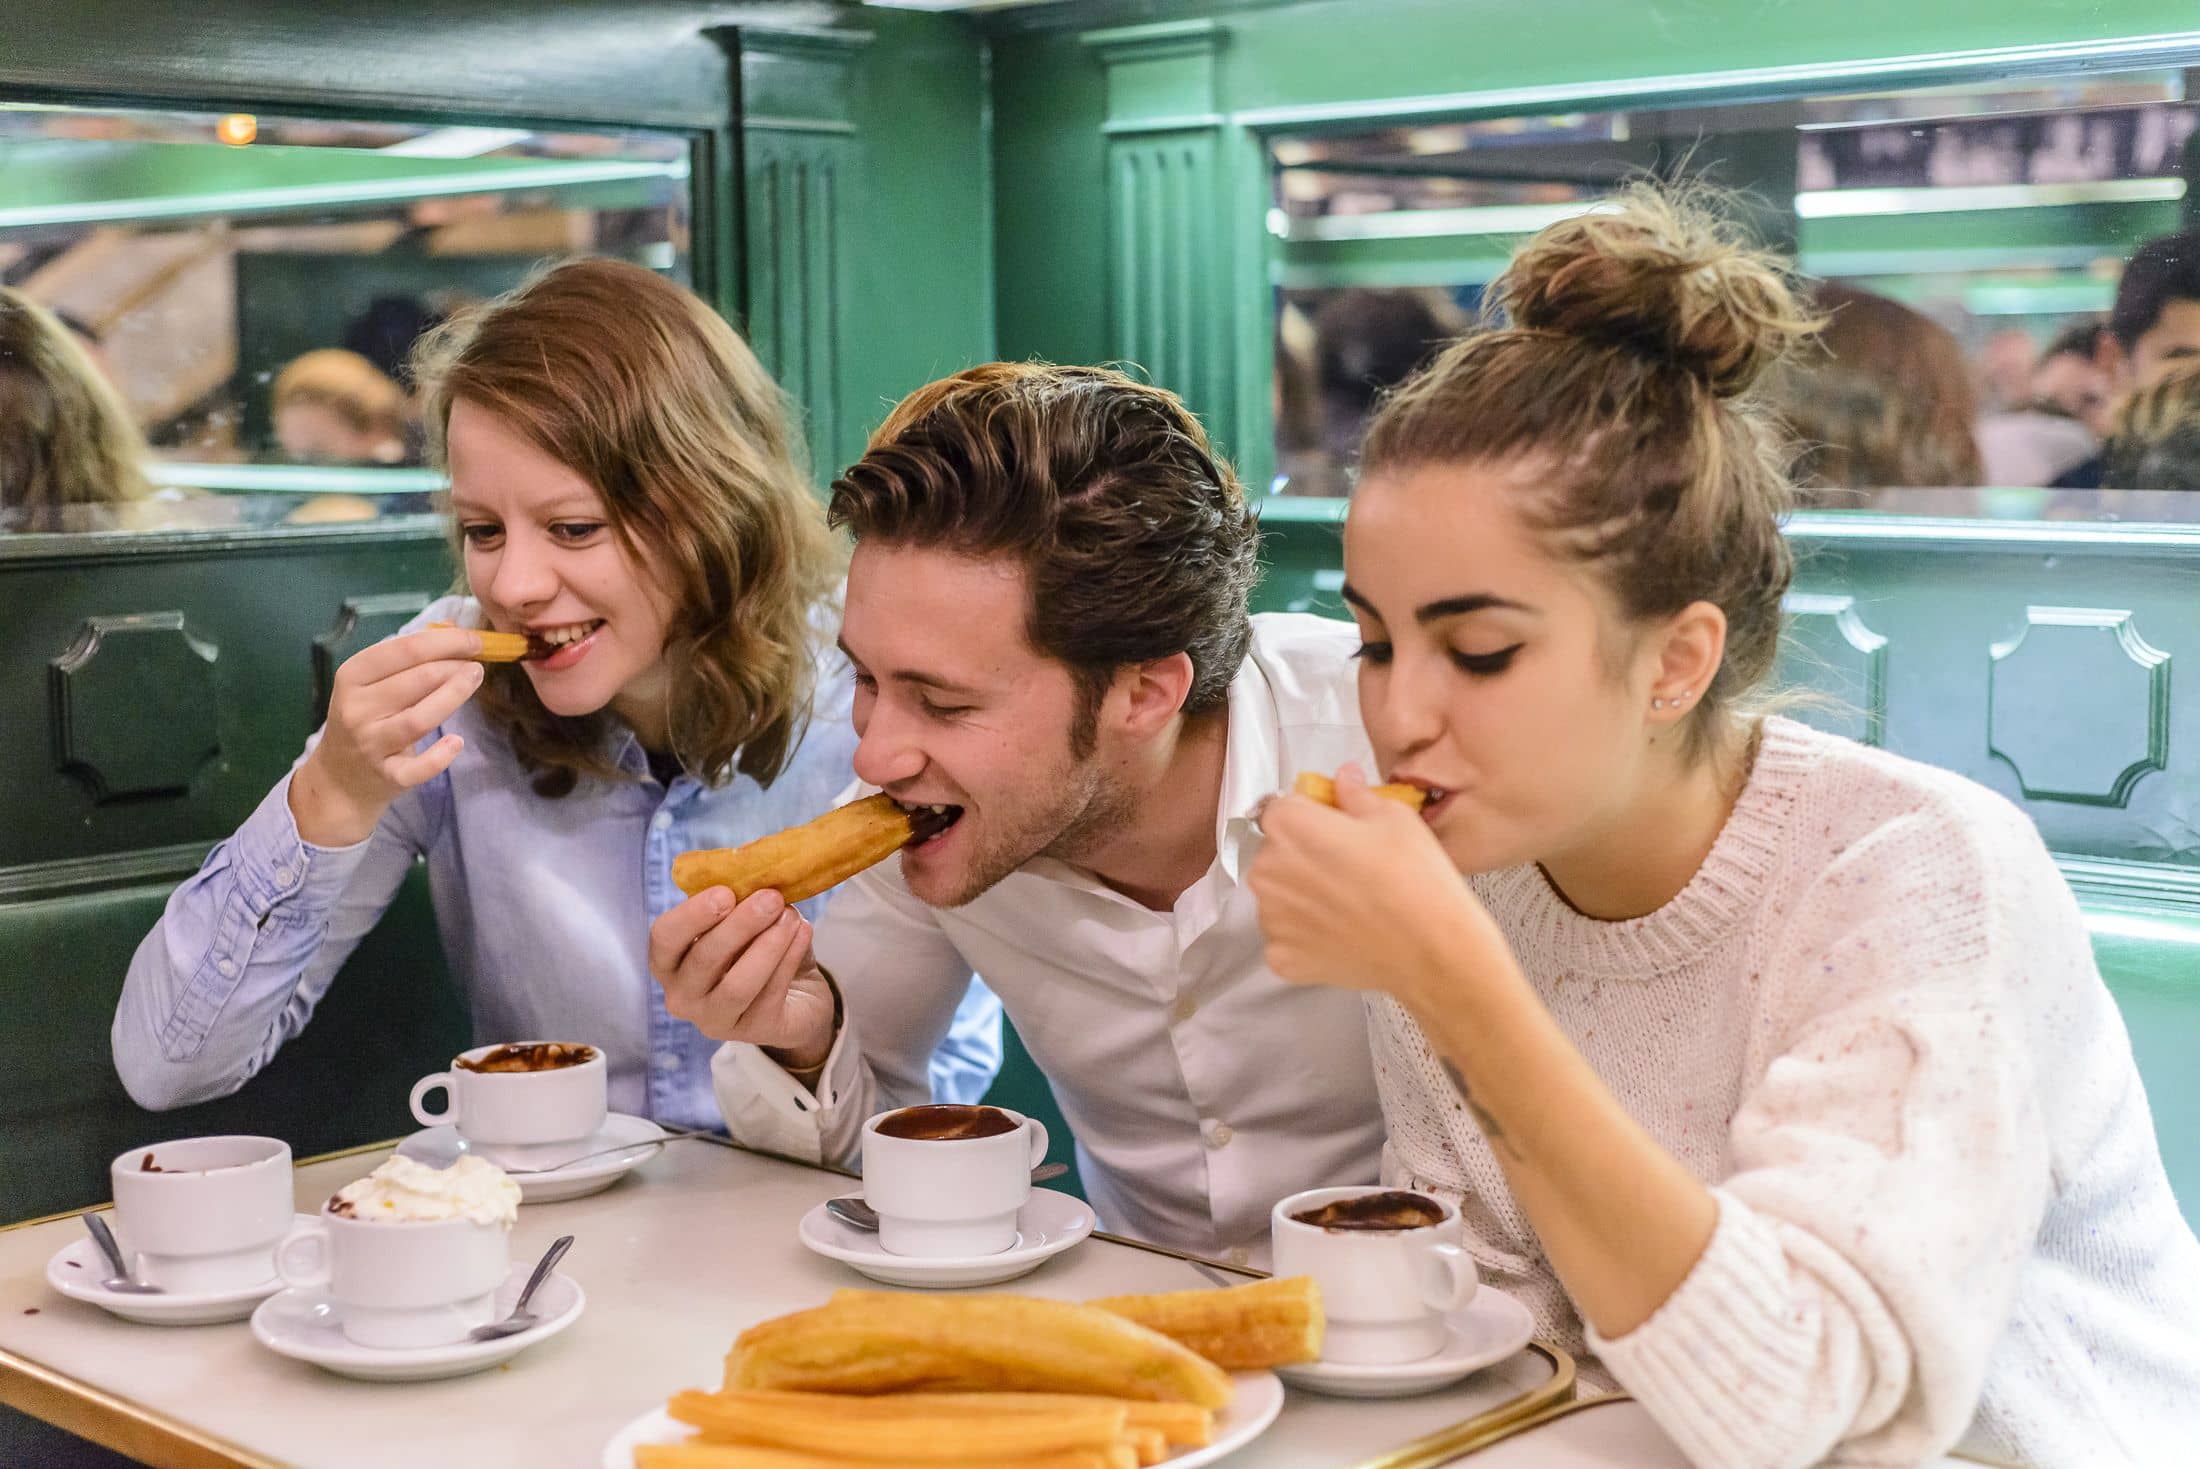 Three people eating chocolate and churros in Spain